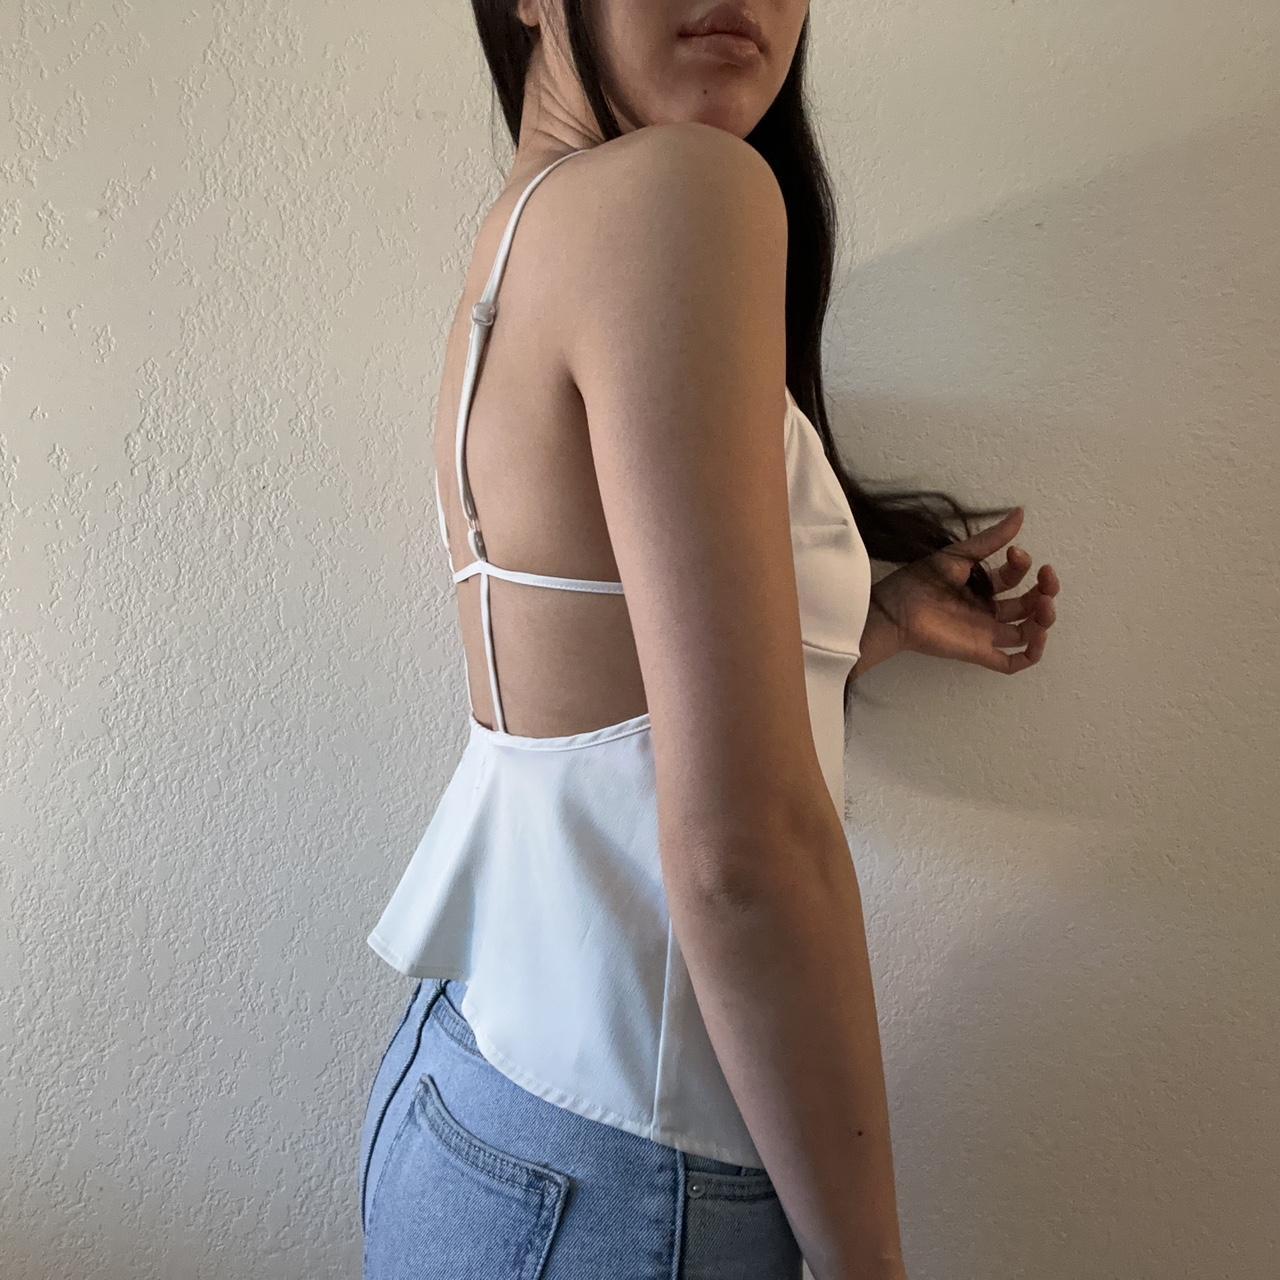 Urban Outfitters Women's White Vest (3)